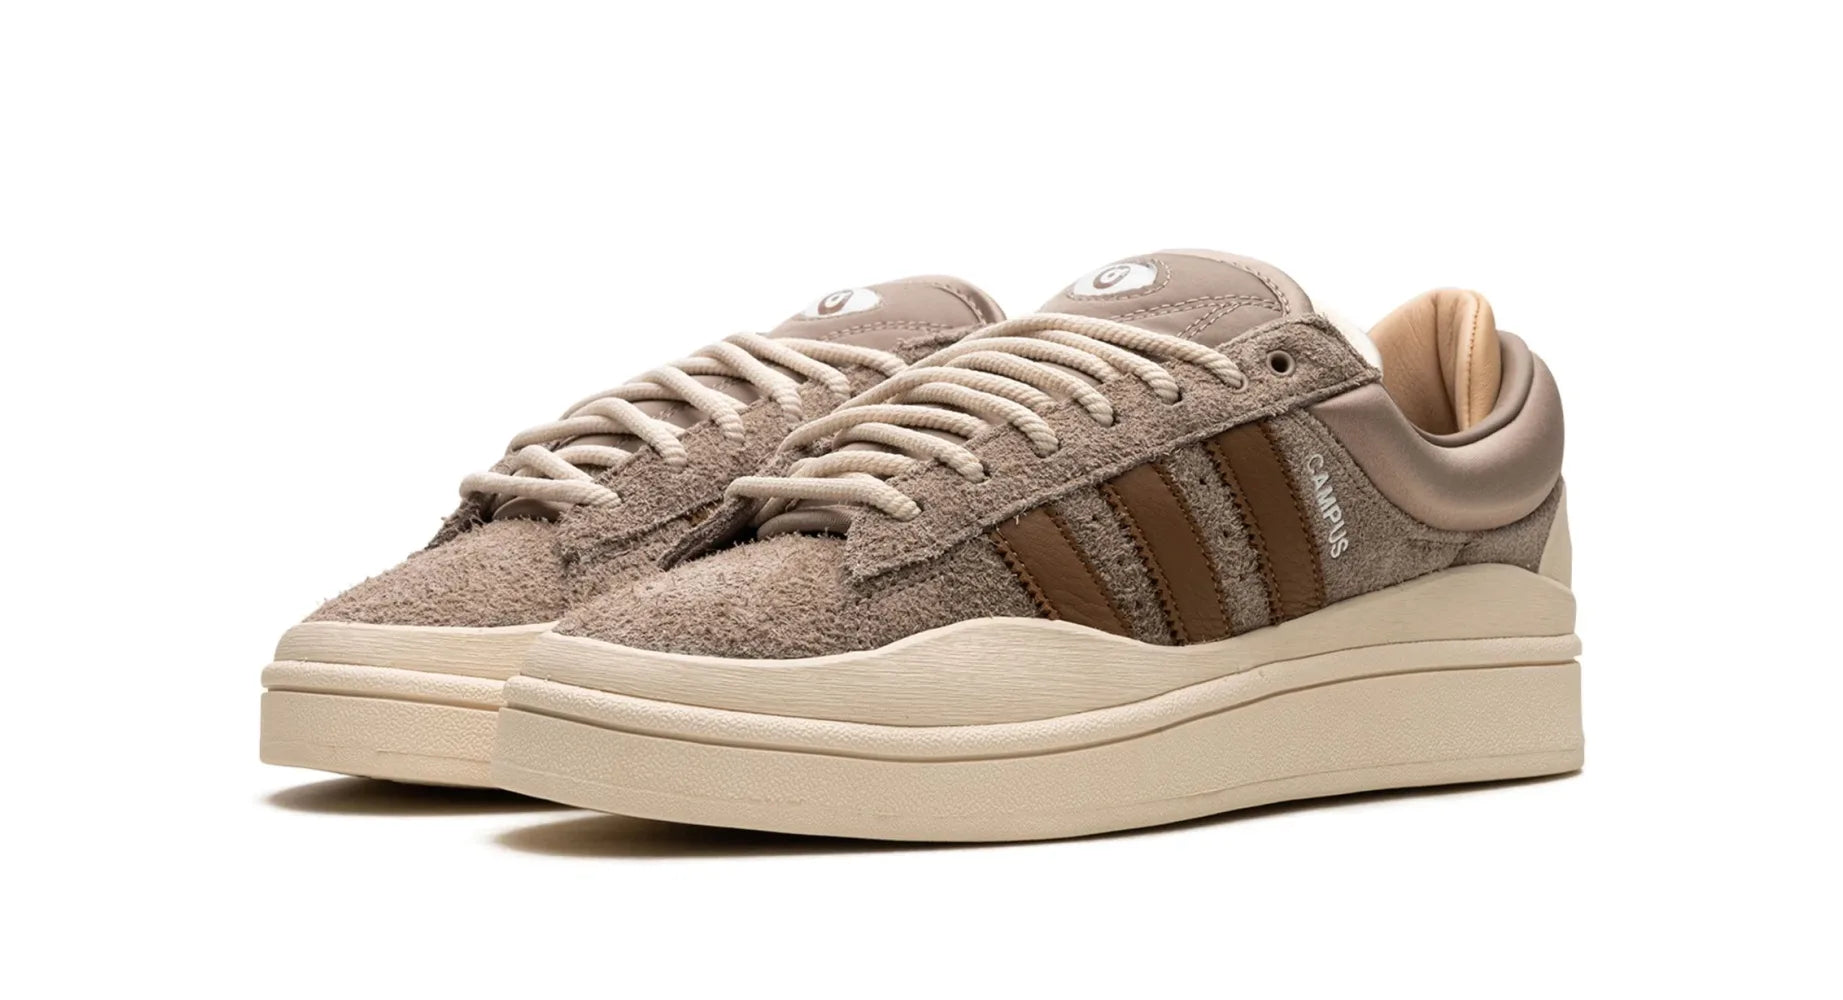 Adidas Campus Light Bad Bunny Chalky Brown